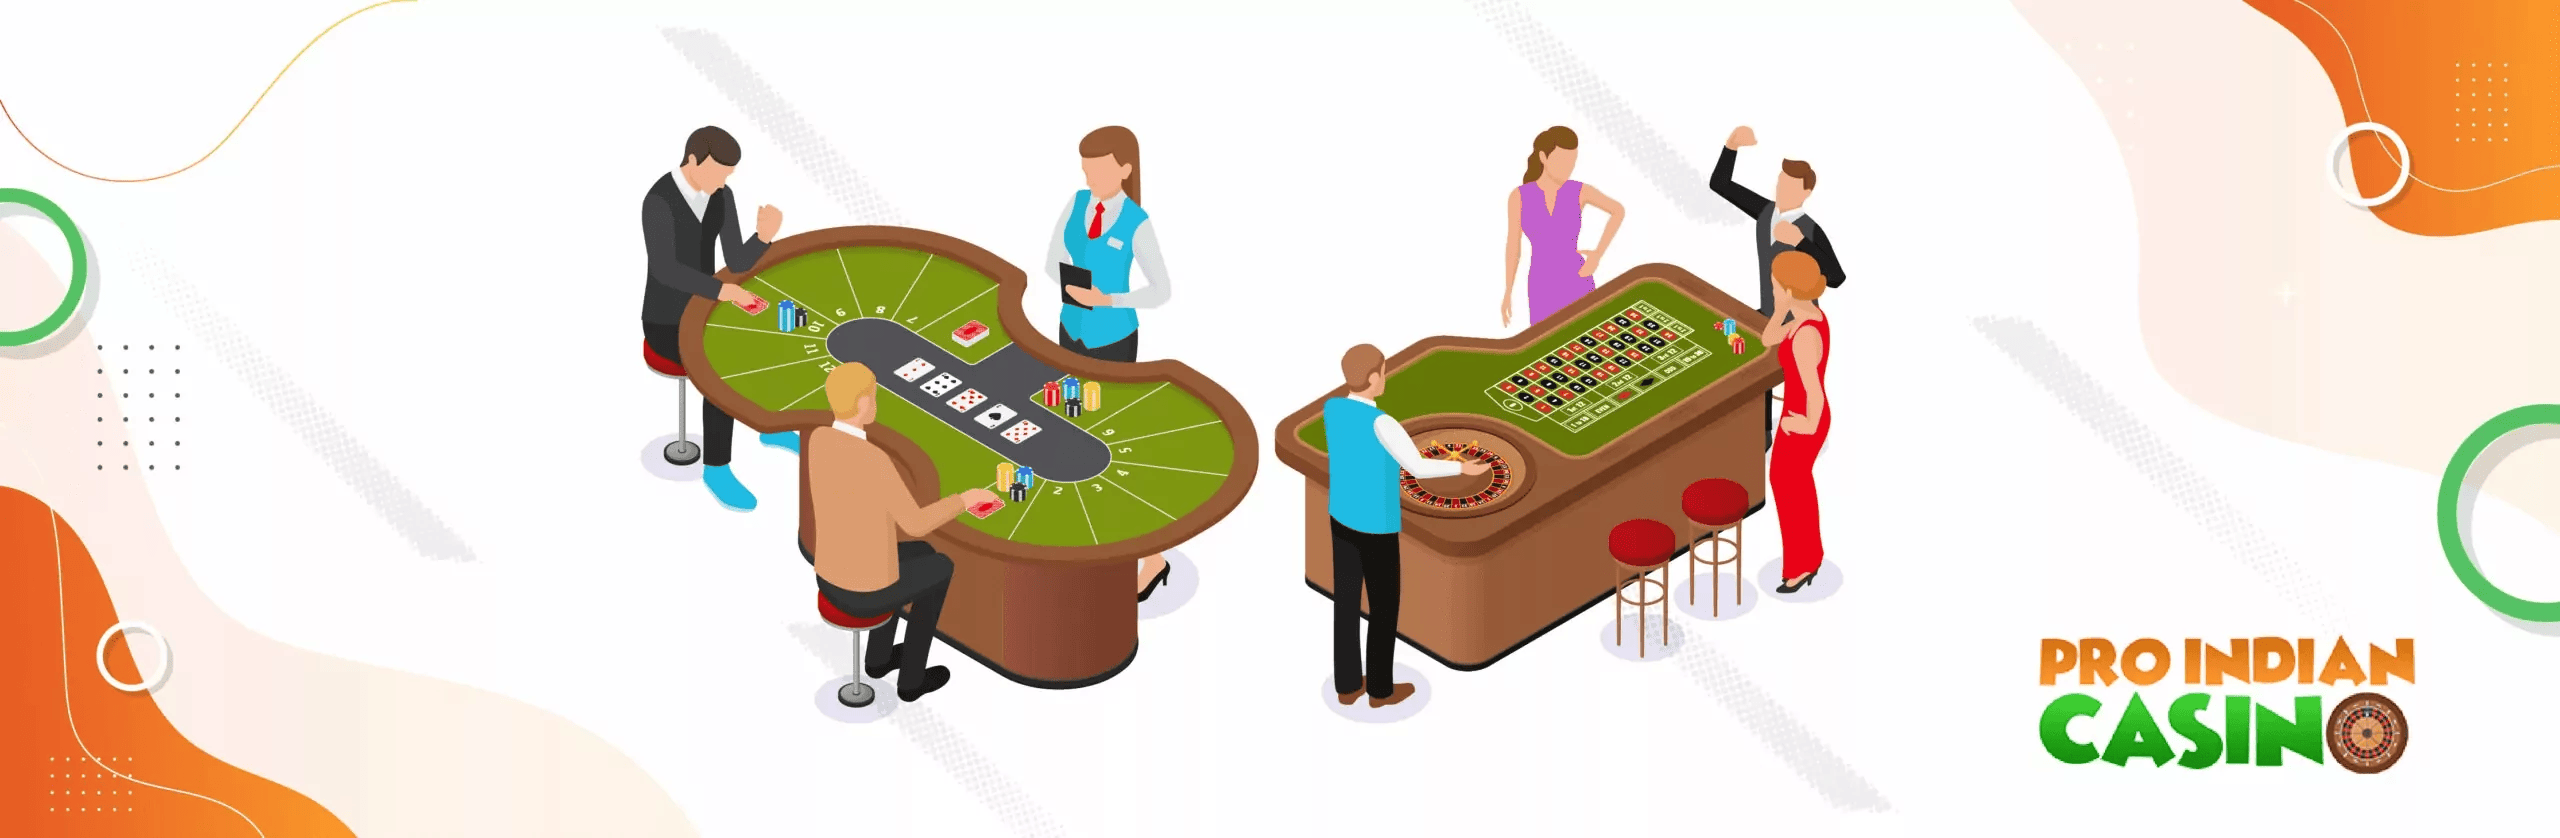 Play-Casino-Games-with-Real-dealers-scaled-1-min